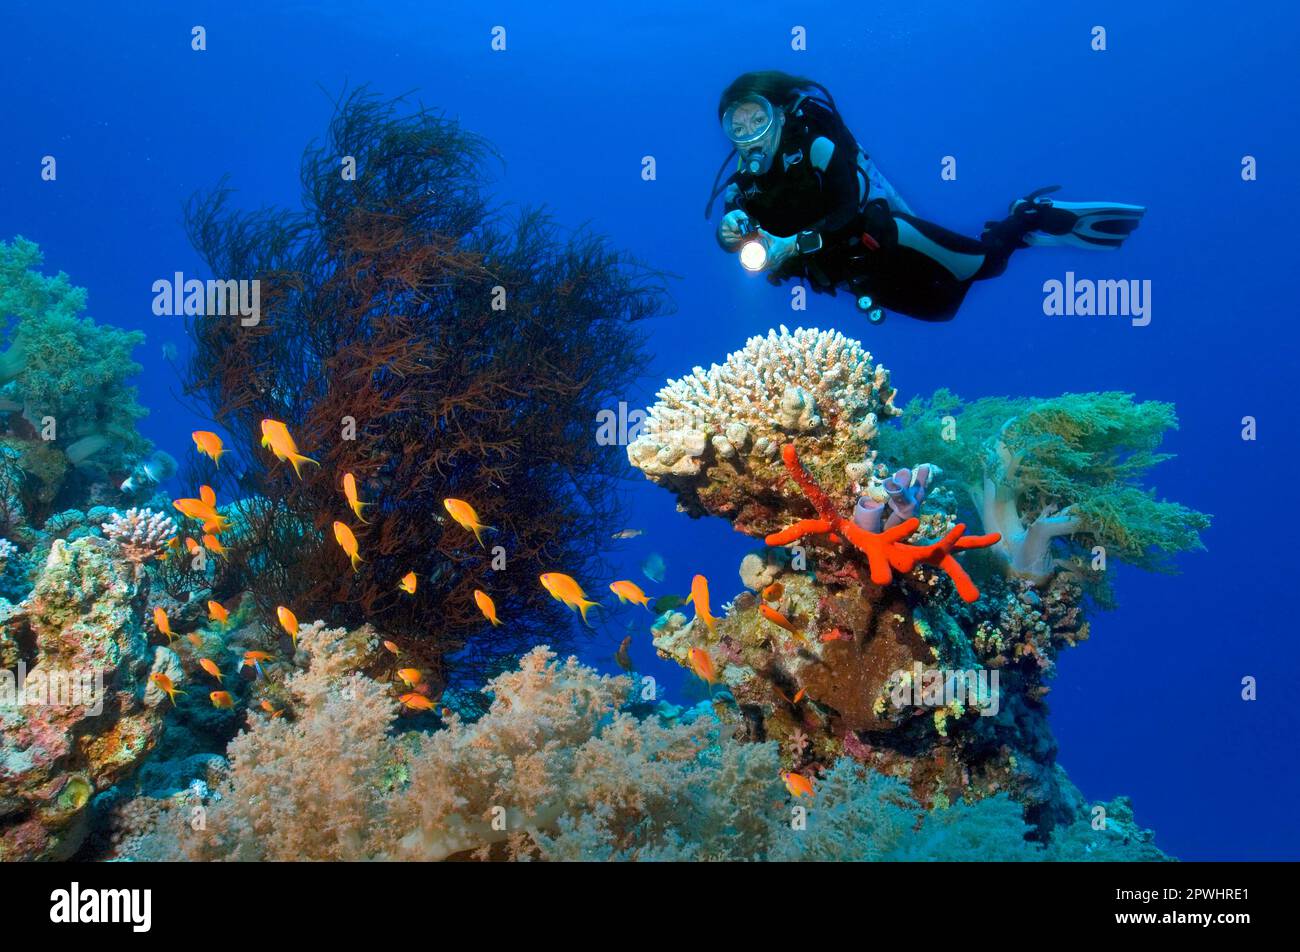 Divers and Corals, Black Coral, Stone Coral, Soft Coral, Red Sea Flagfish, Jewel Flagfish, Harem Flagfish (Antipatharia sp. Acropora sp. Alcyonium Stock Photo